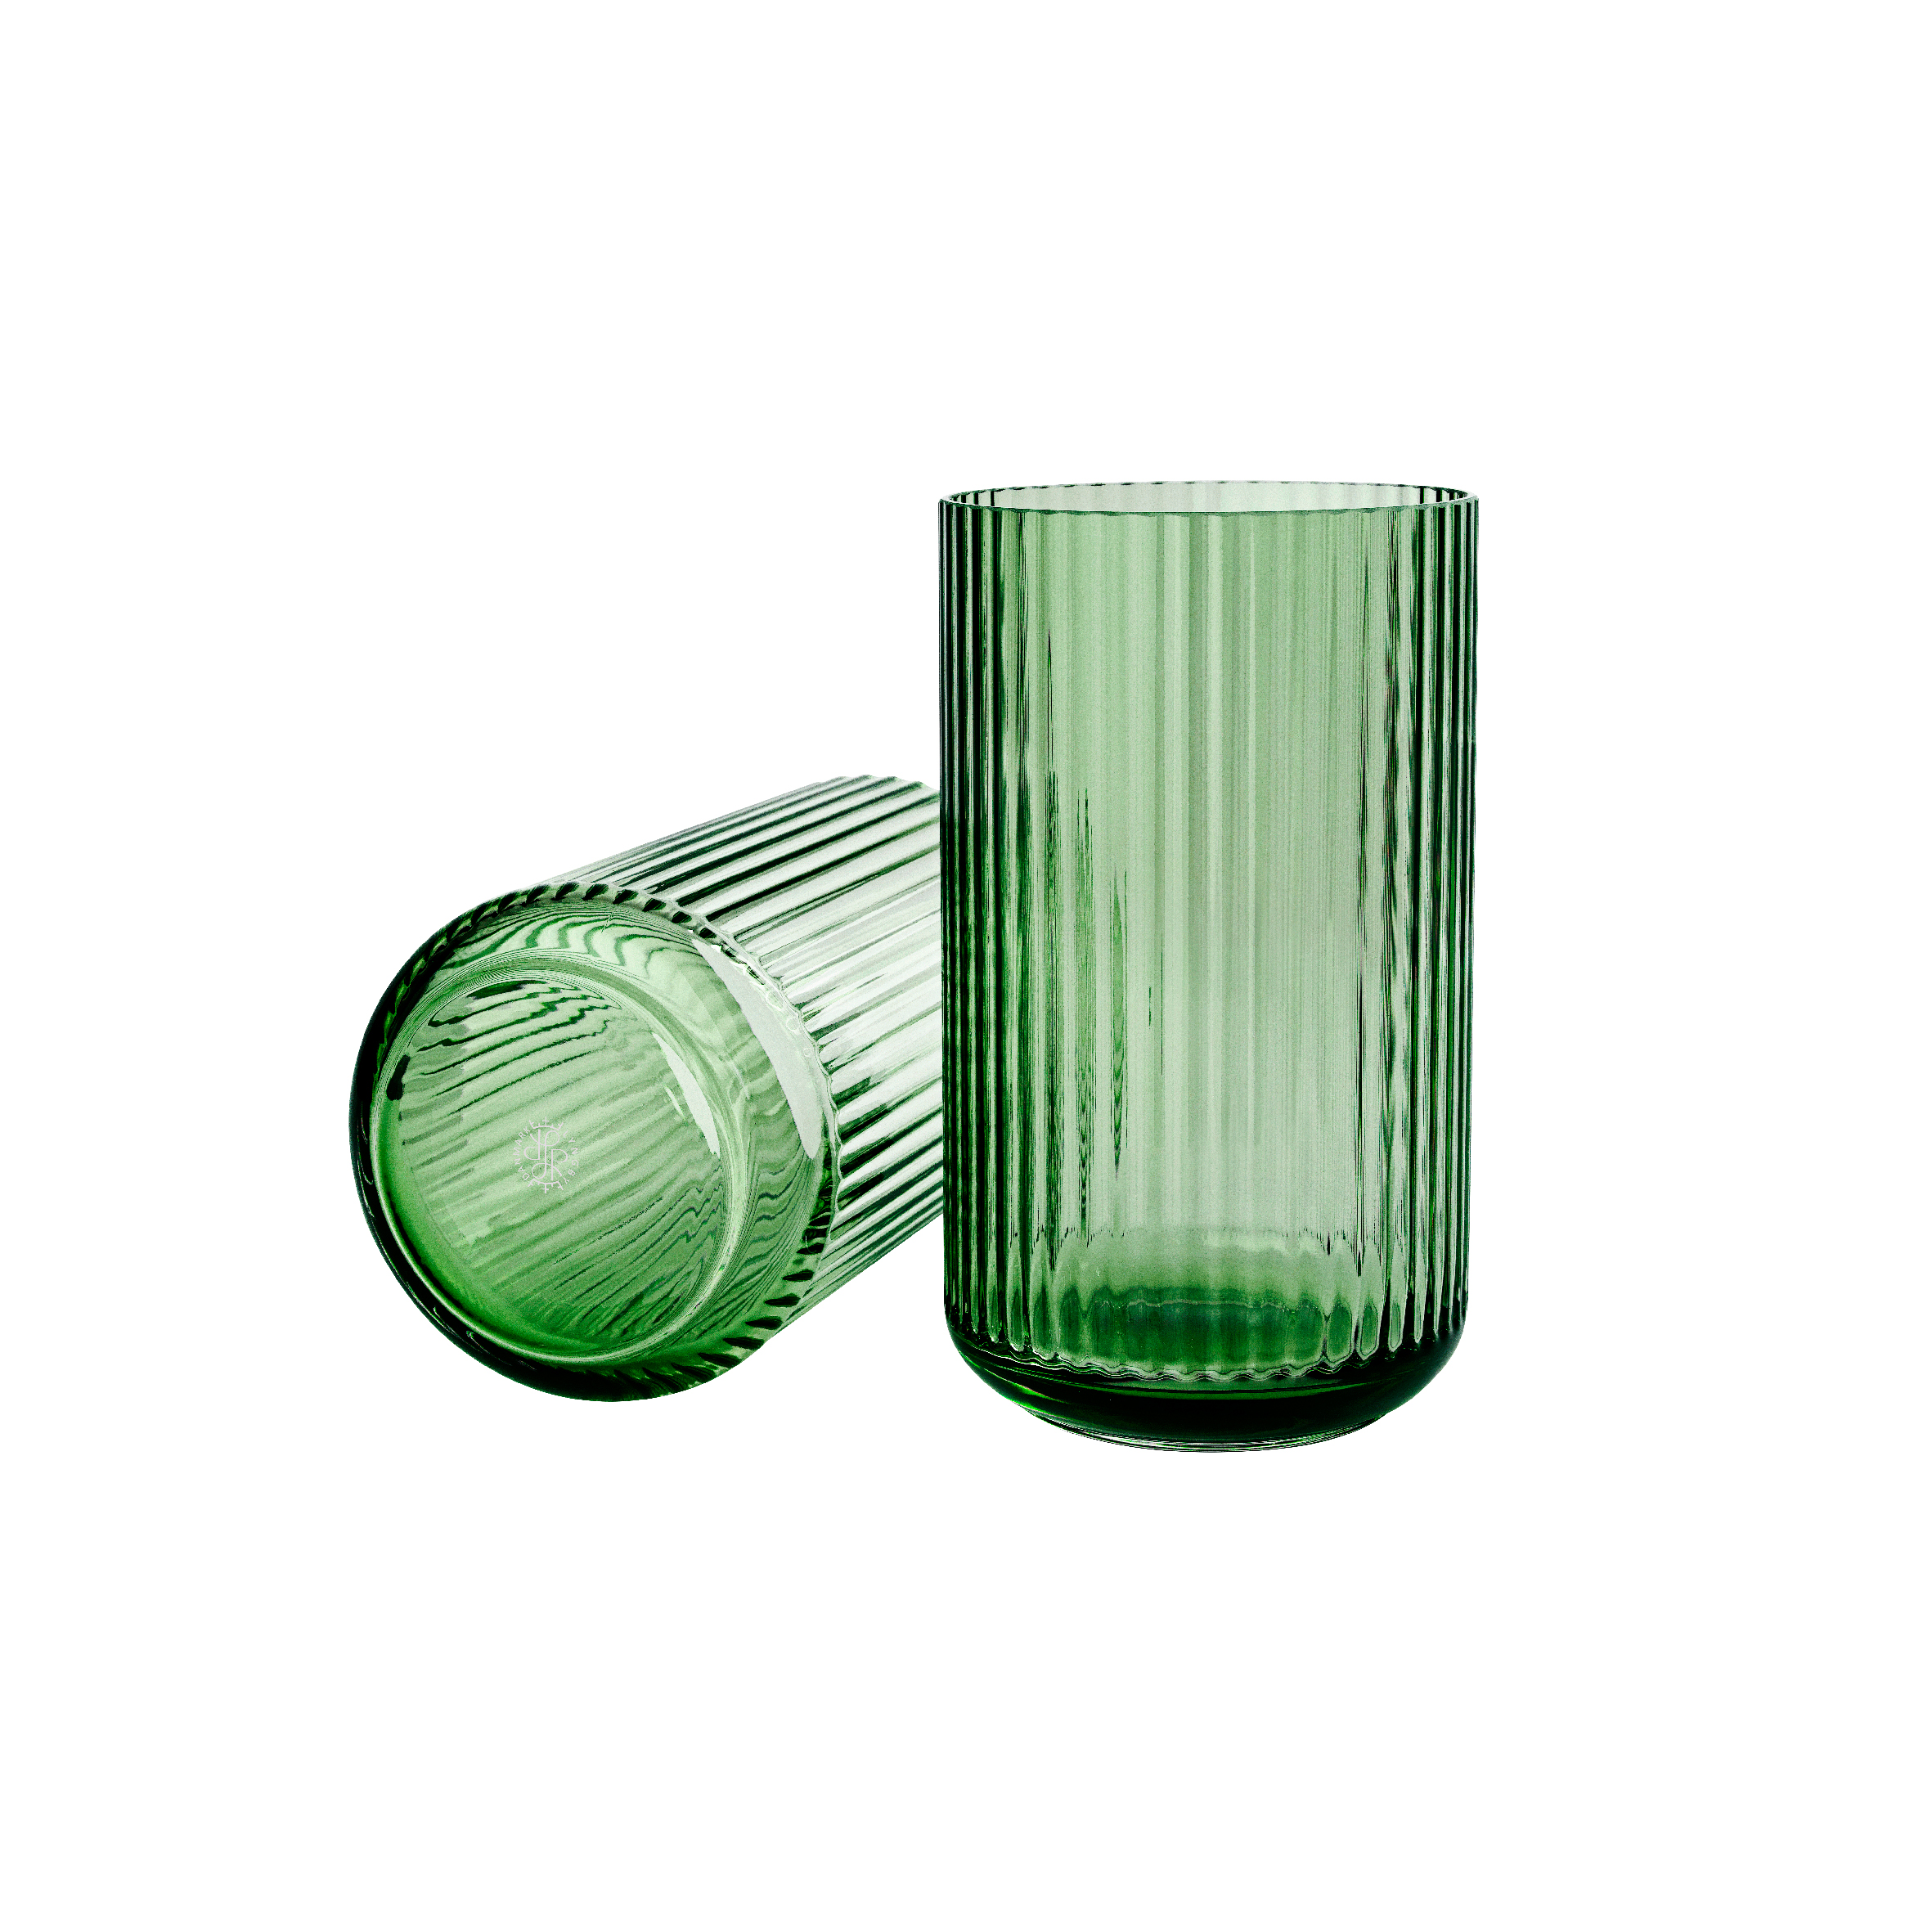 Lyngby Porcelaen Small Glass Vase in Green 